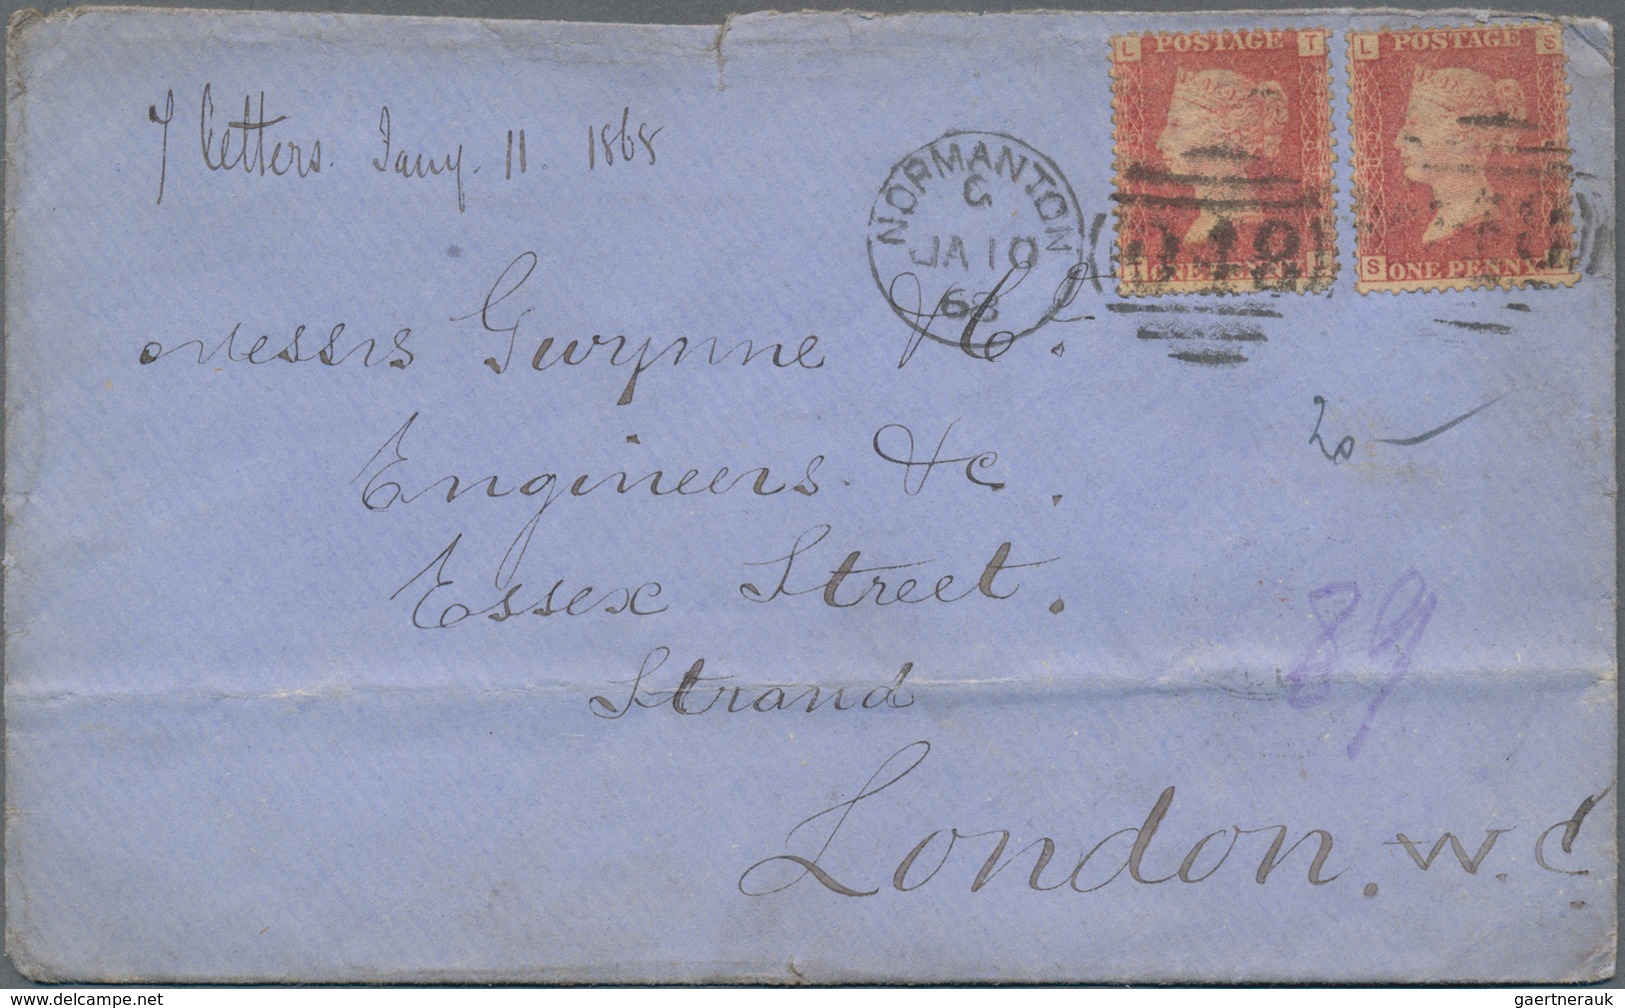 Großbritannien: 1842/1980, recommendable lot of 720 covers and cards, many of them covering the time